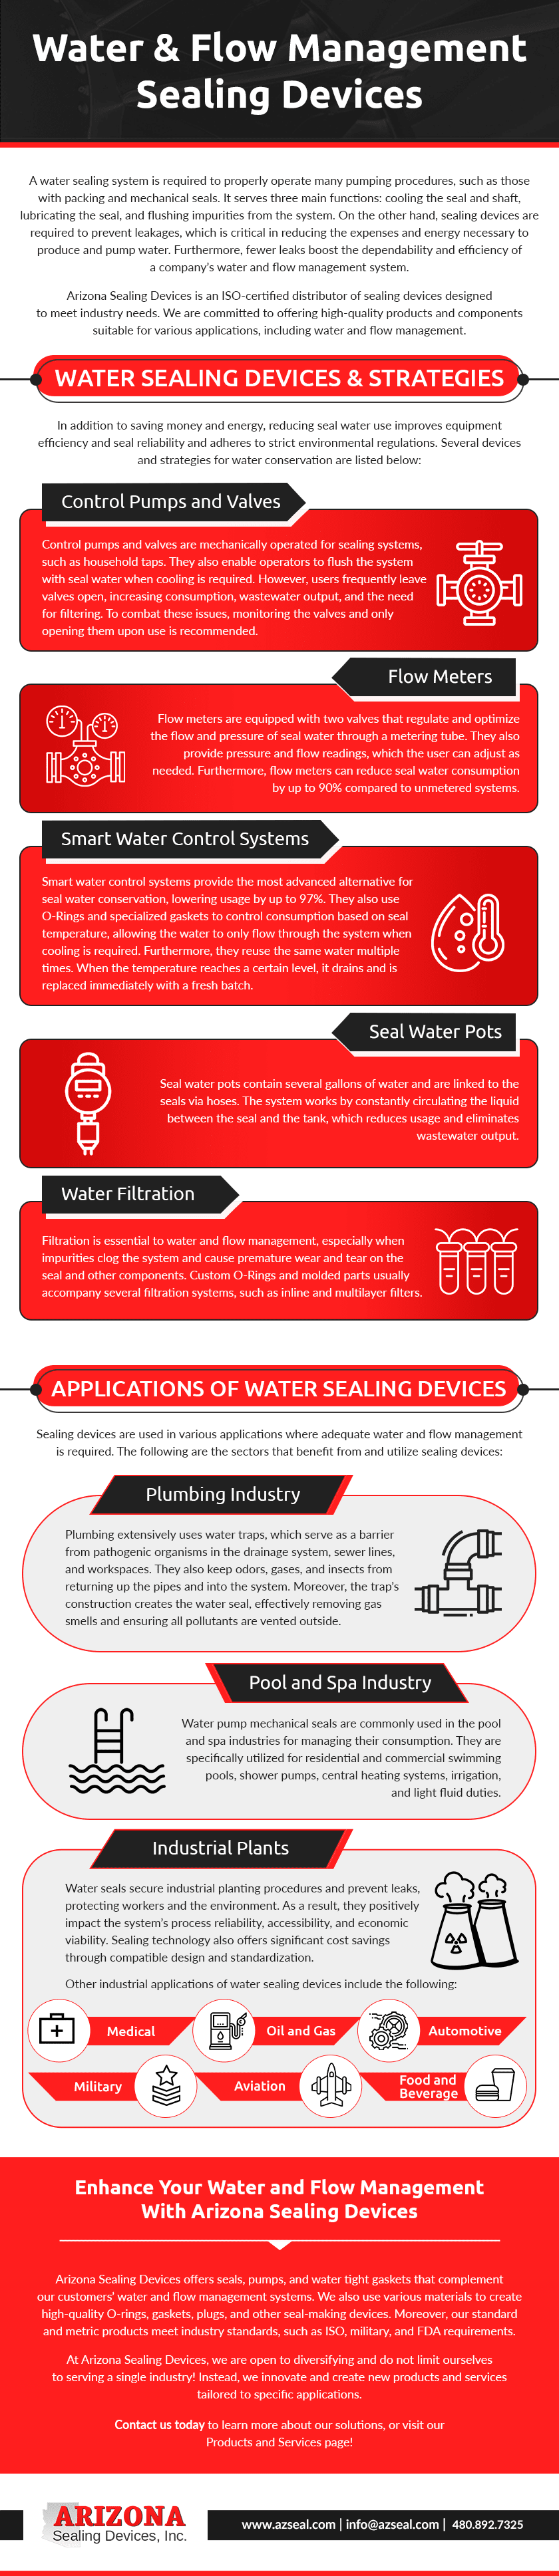  Water & Flow Management Sealing Devices